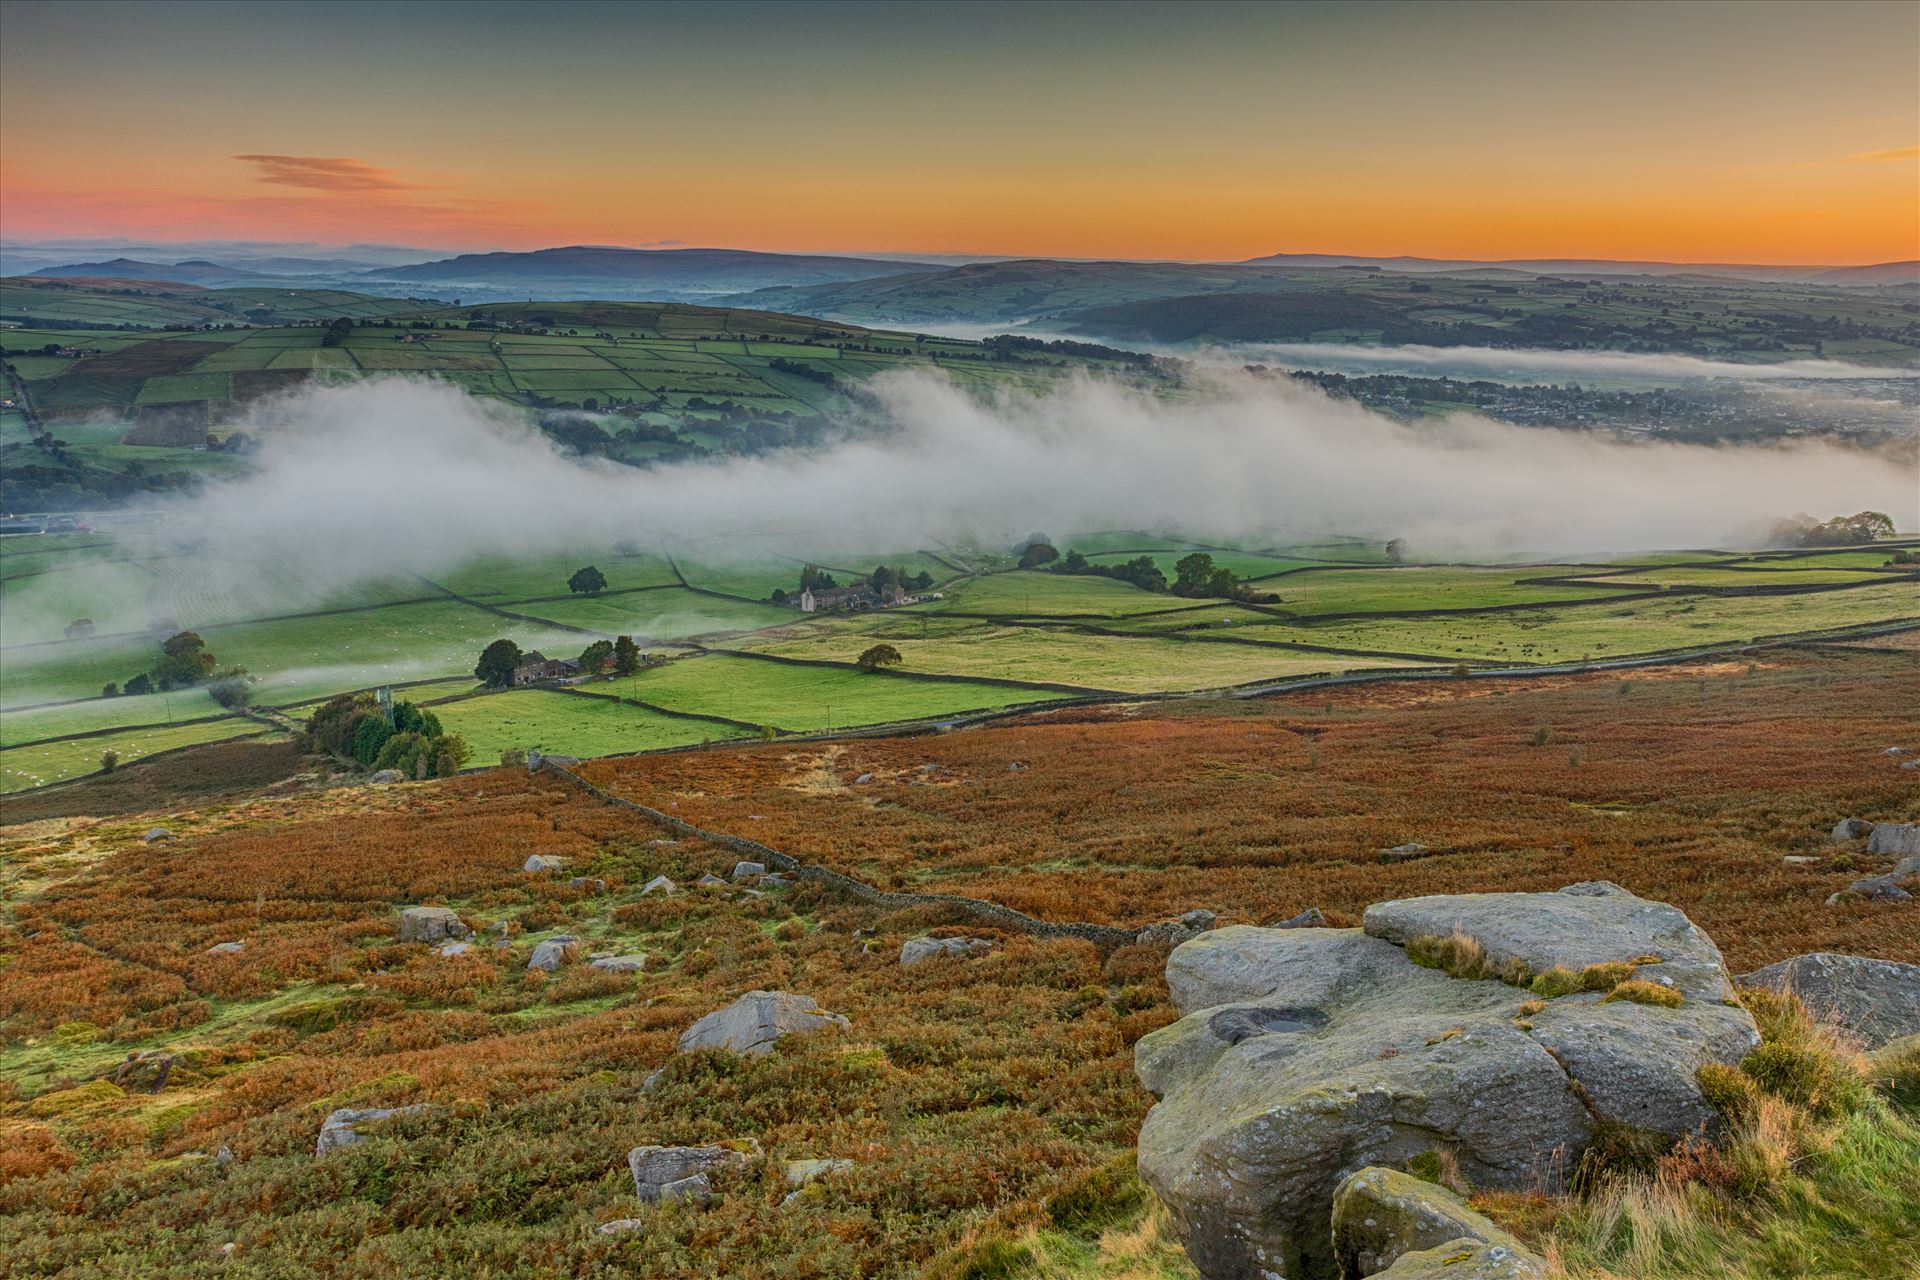 Cowling Misty Morning Looking down the Aire Valley from Cowling Pinnacle (also known as Wainman's Pinnacle) towards Lund's Tower.  by Tony Keogh Photography